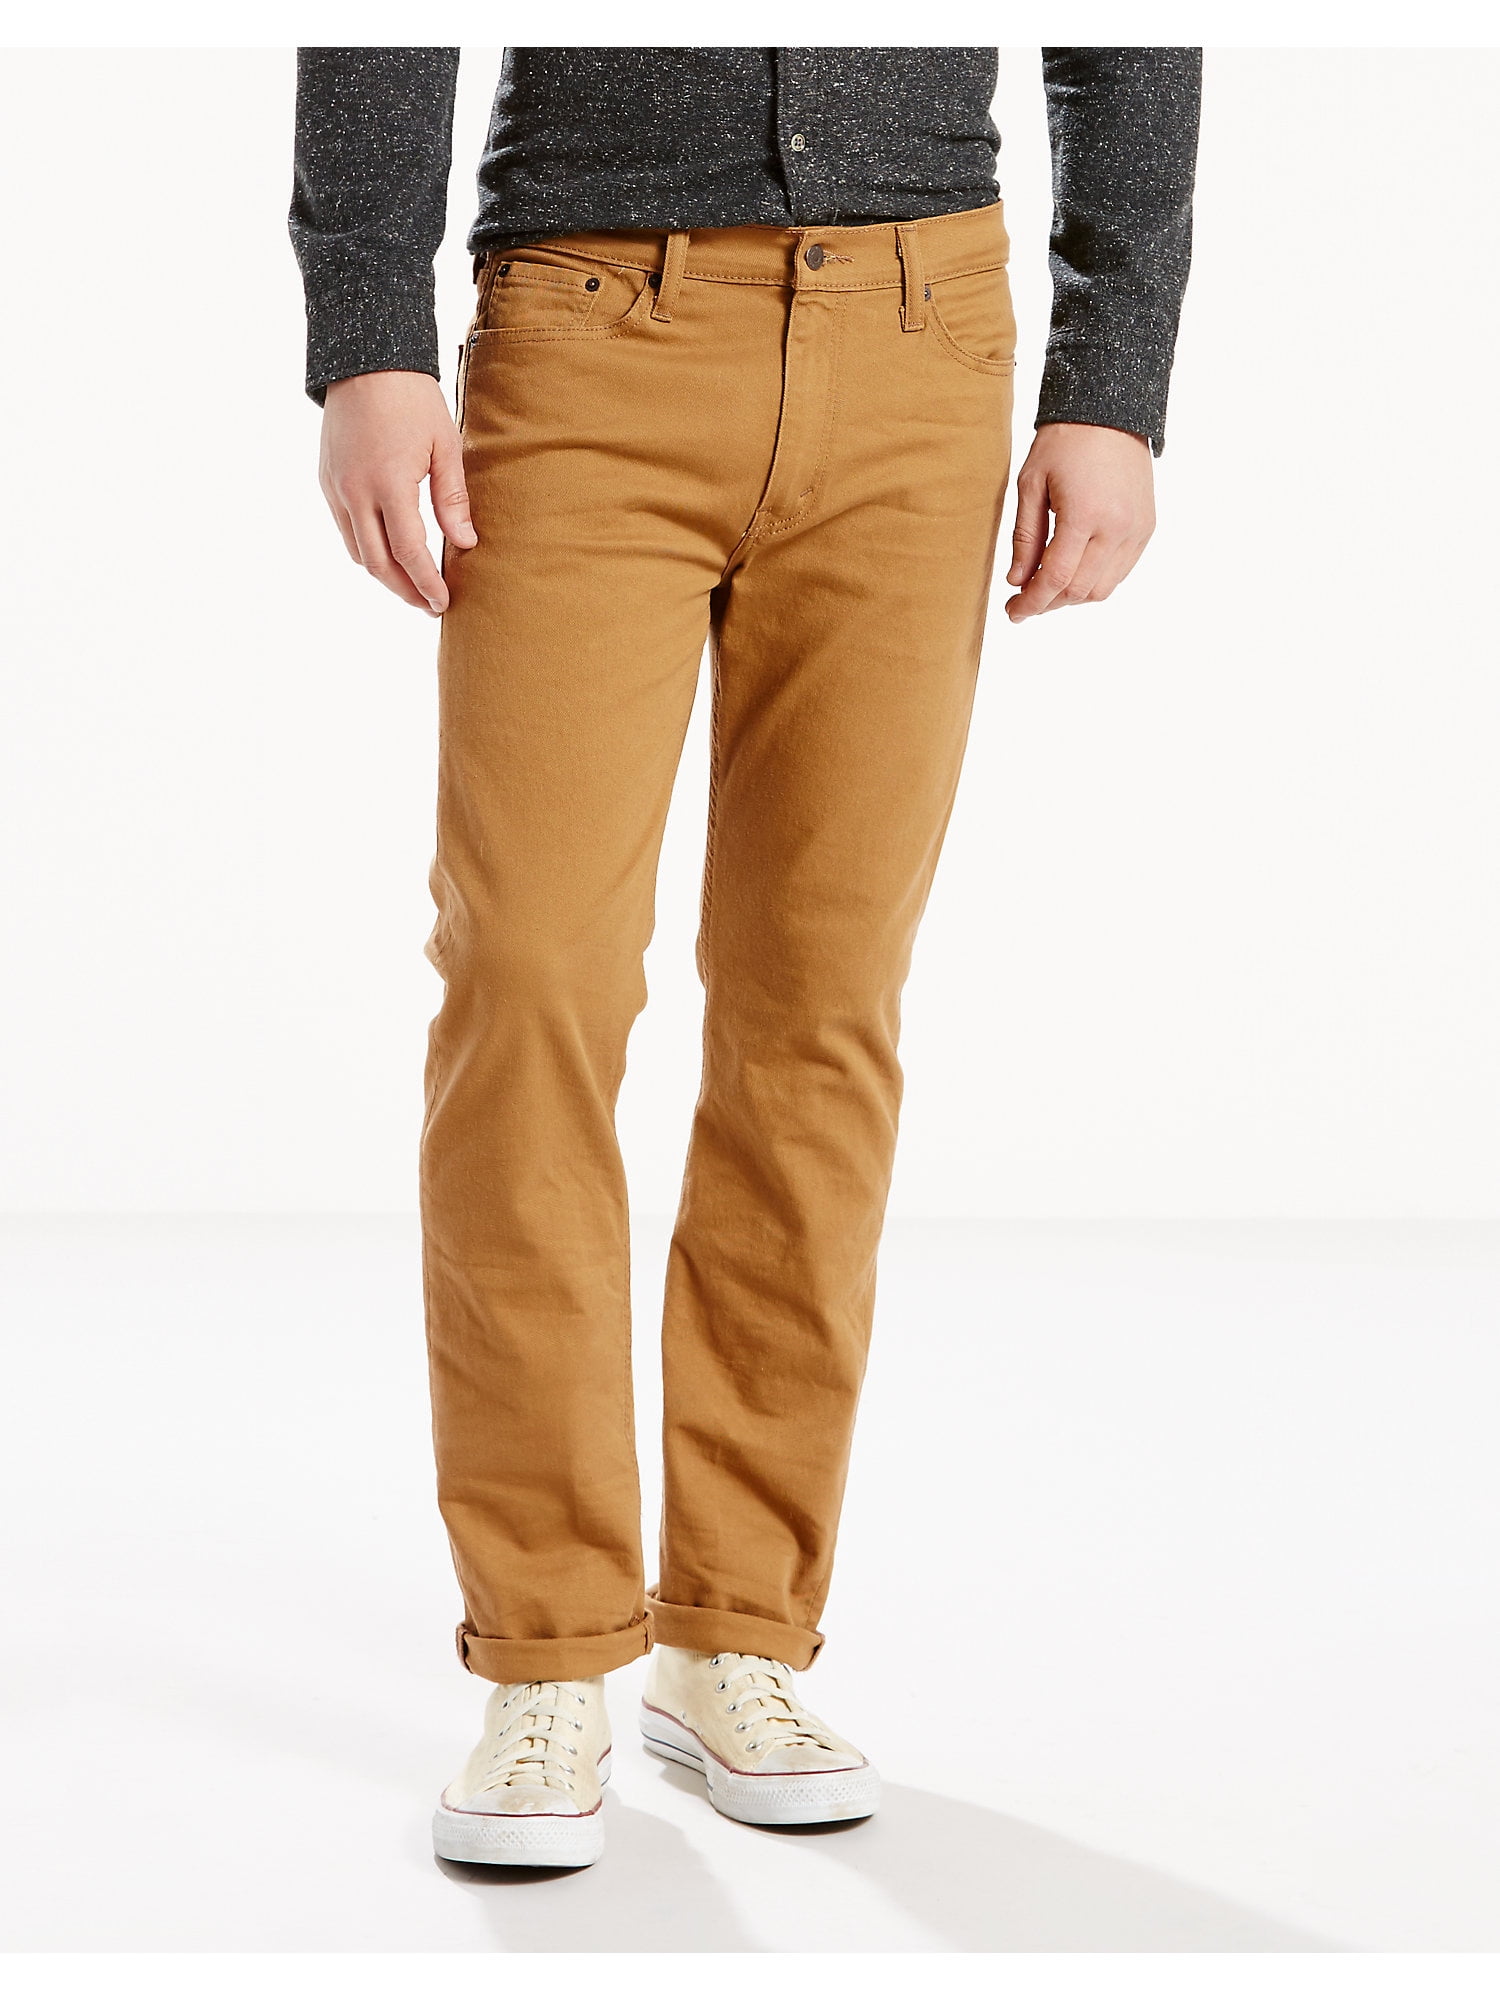 Levis | Levis Skinny Tapered Jeans | Skinny Jeans | House of Fraser